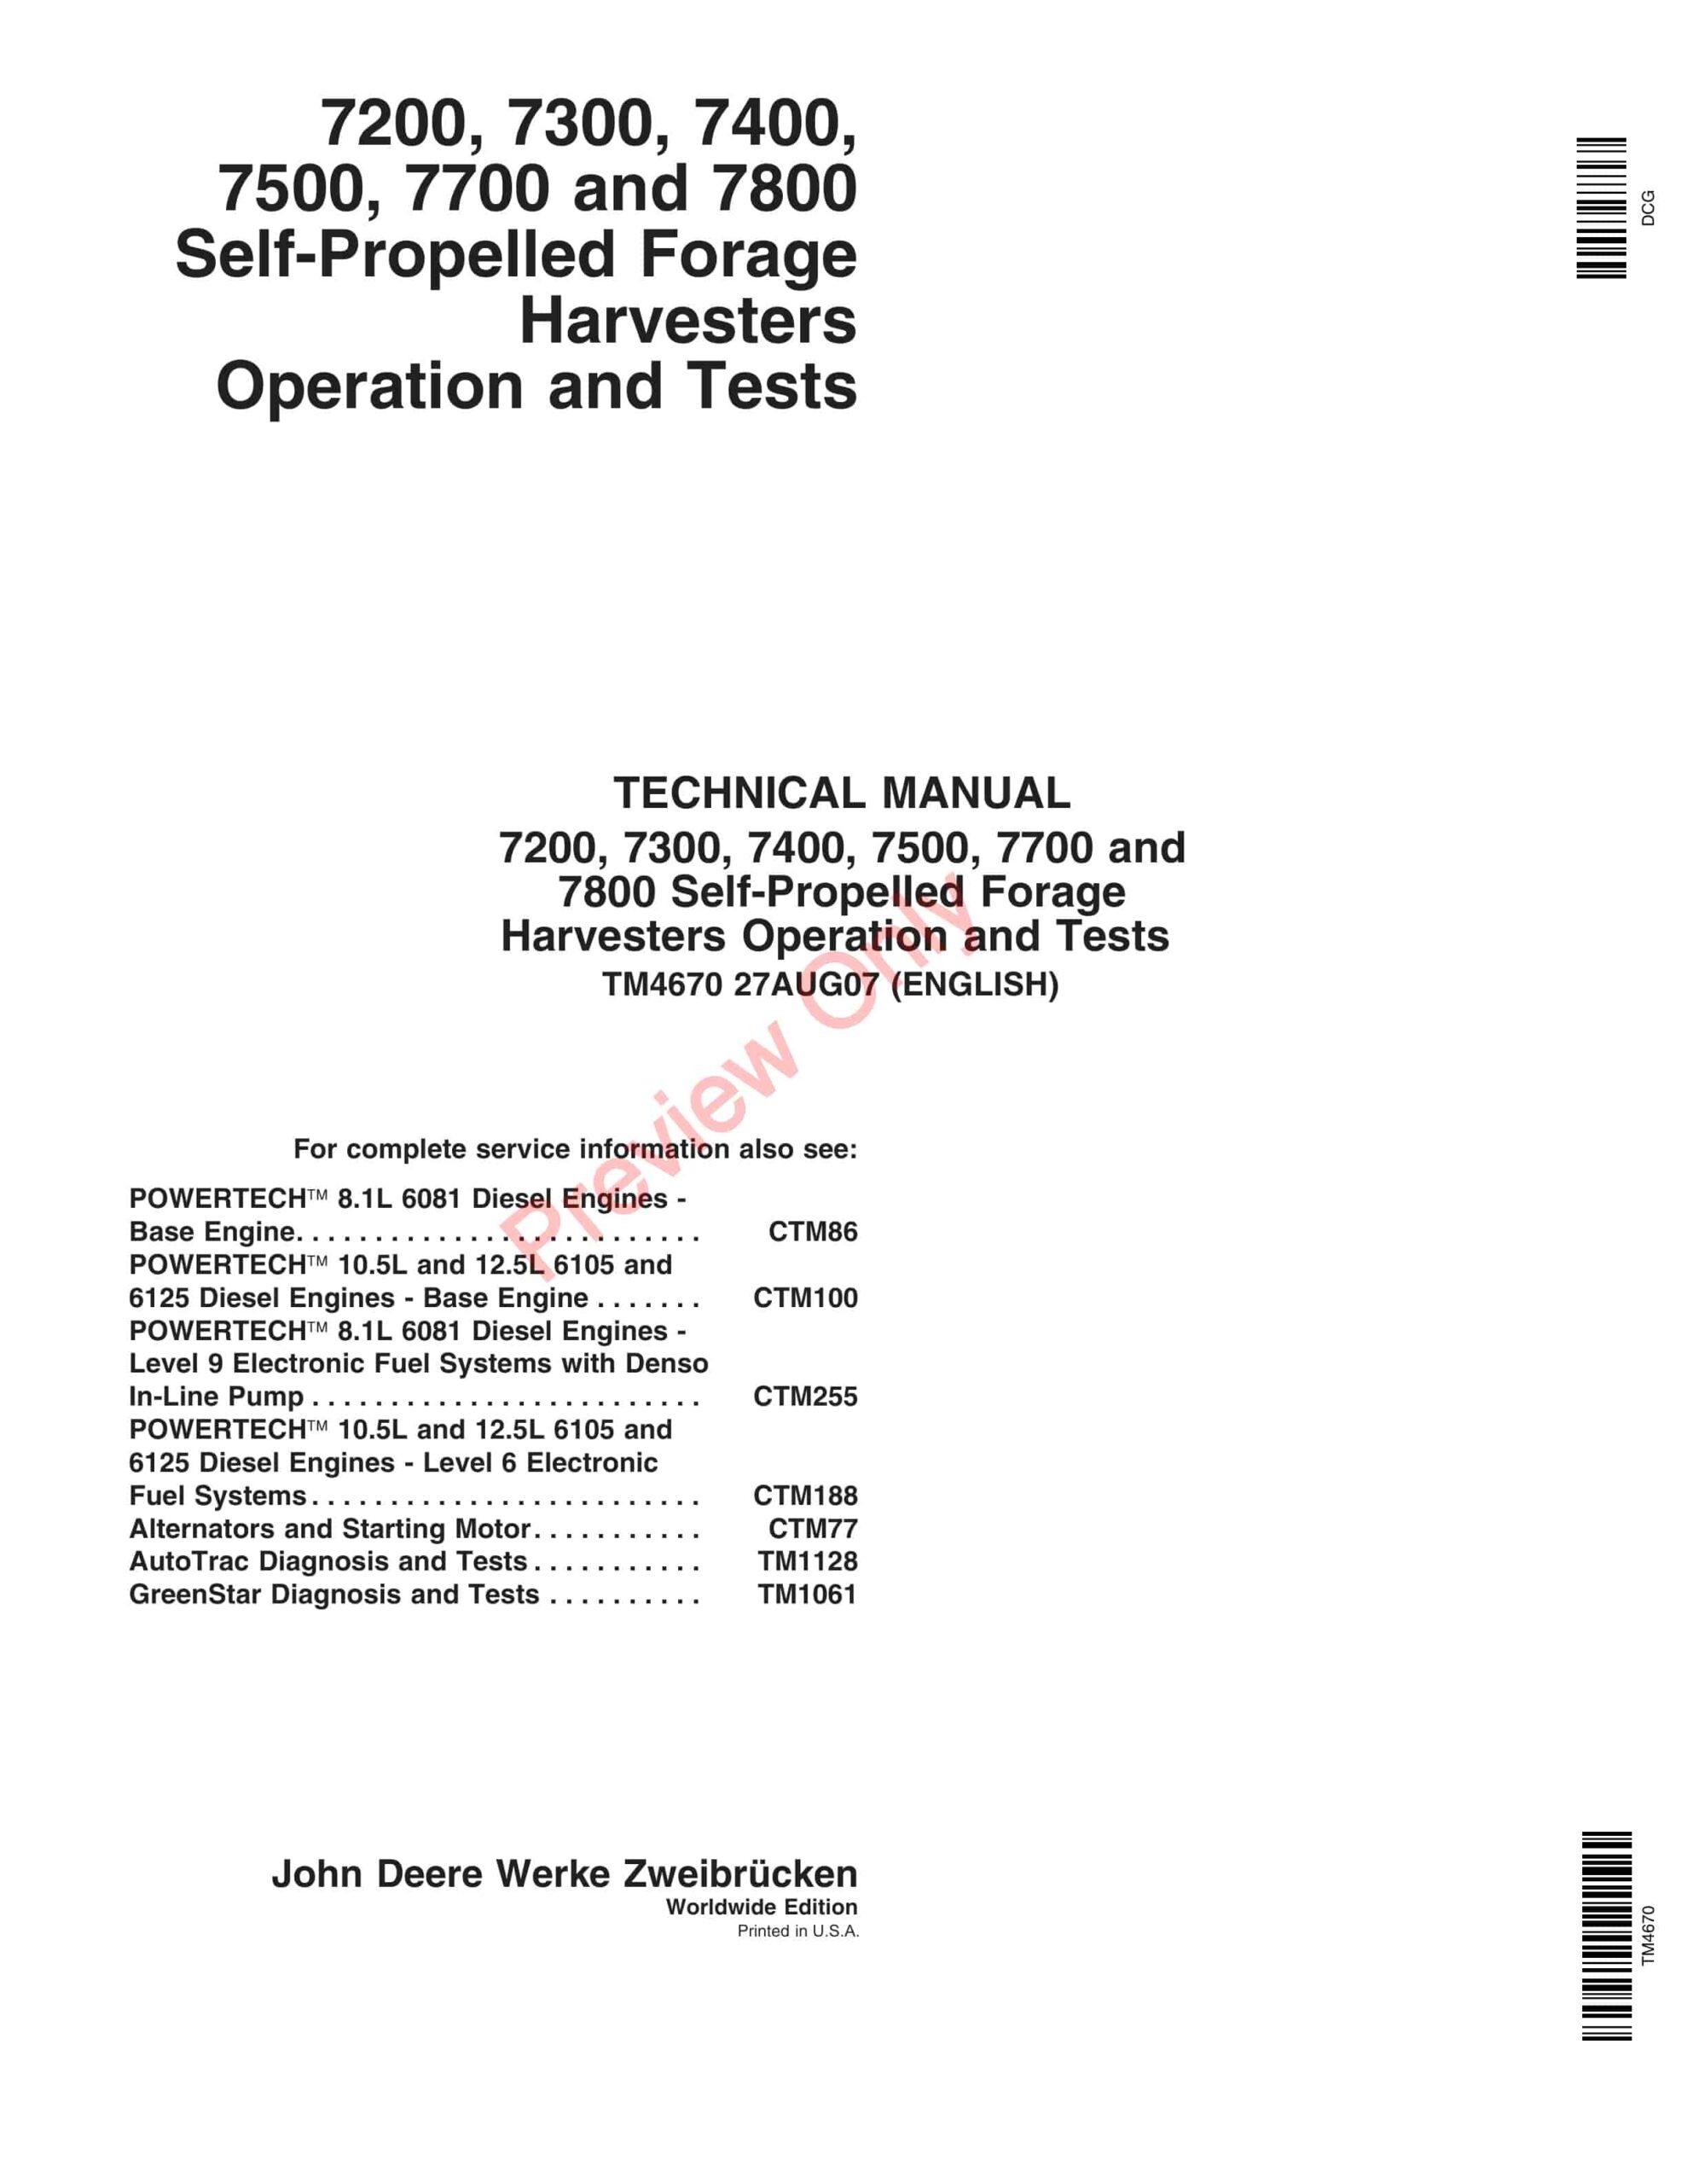 John Deere 7200, 7300, 7400, 7500, 7700 and 7800 Forage Harvester Technical Manual TM4670 27AUG07-1